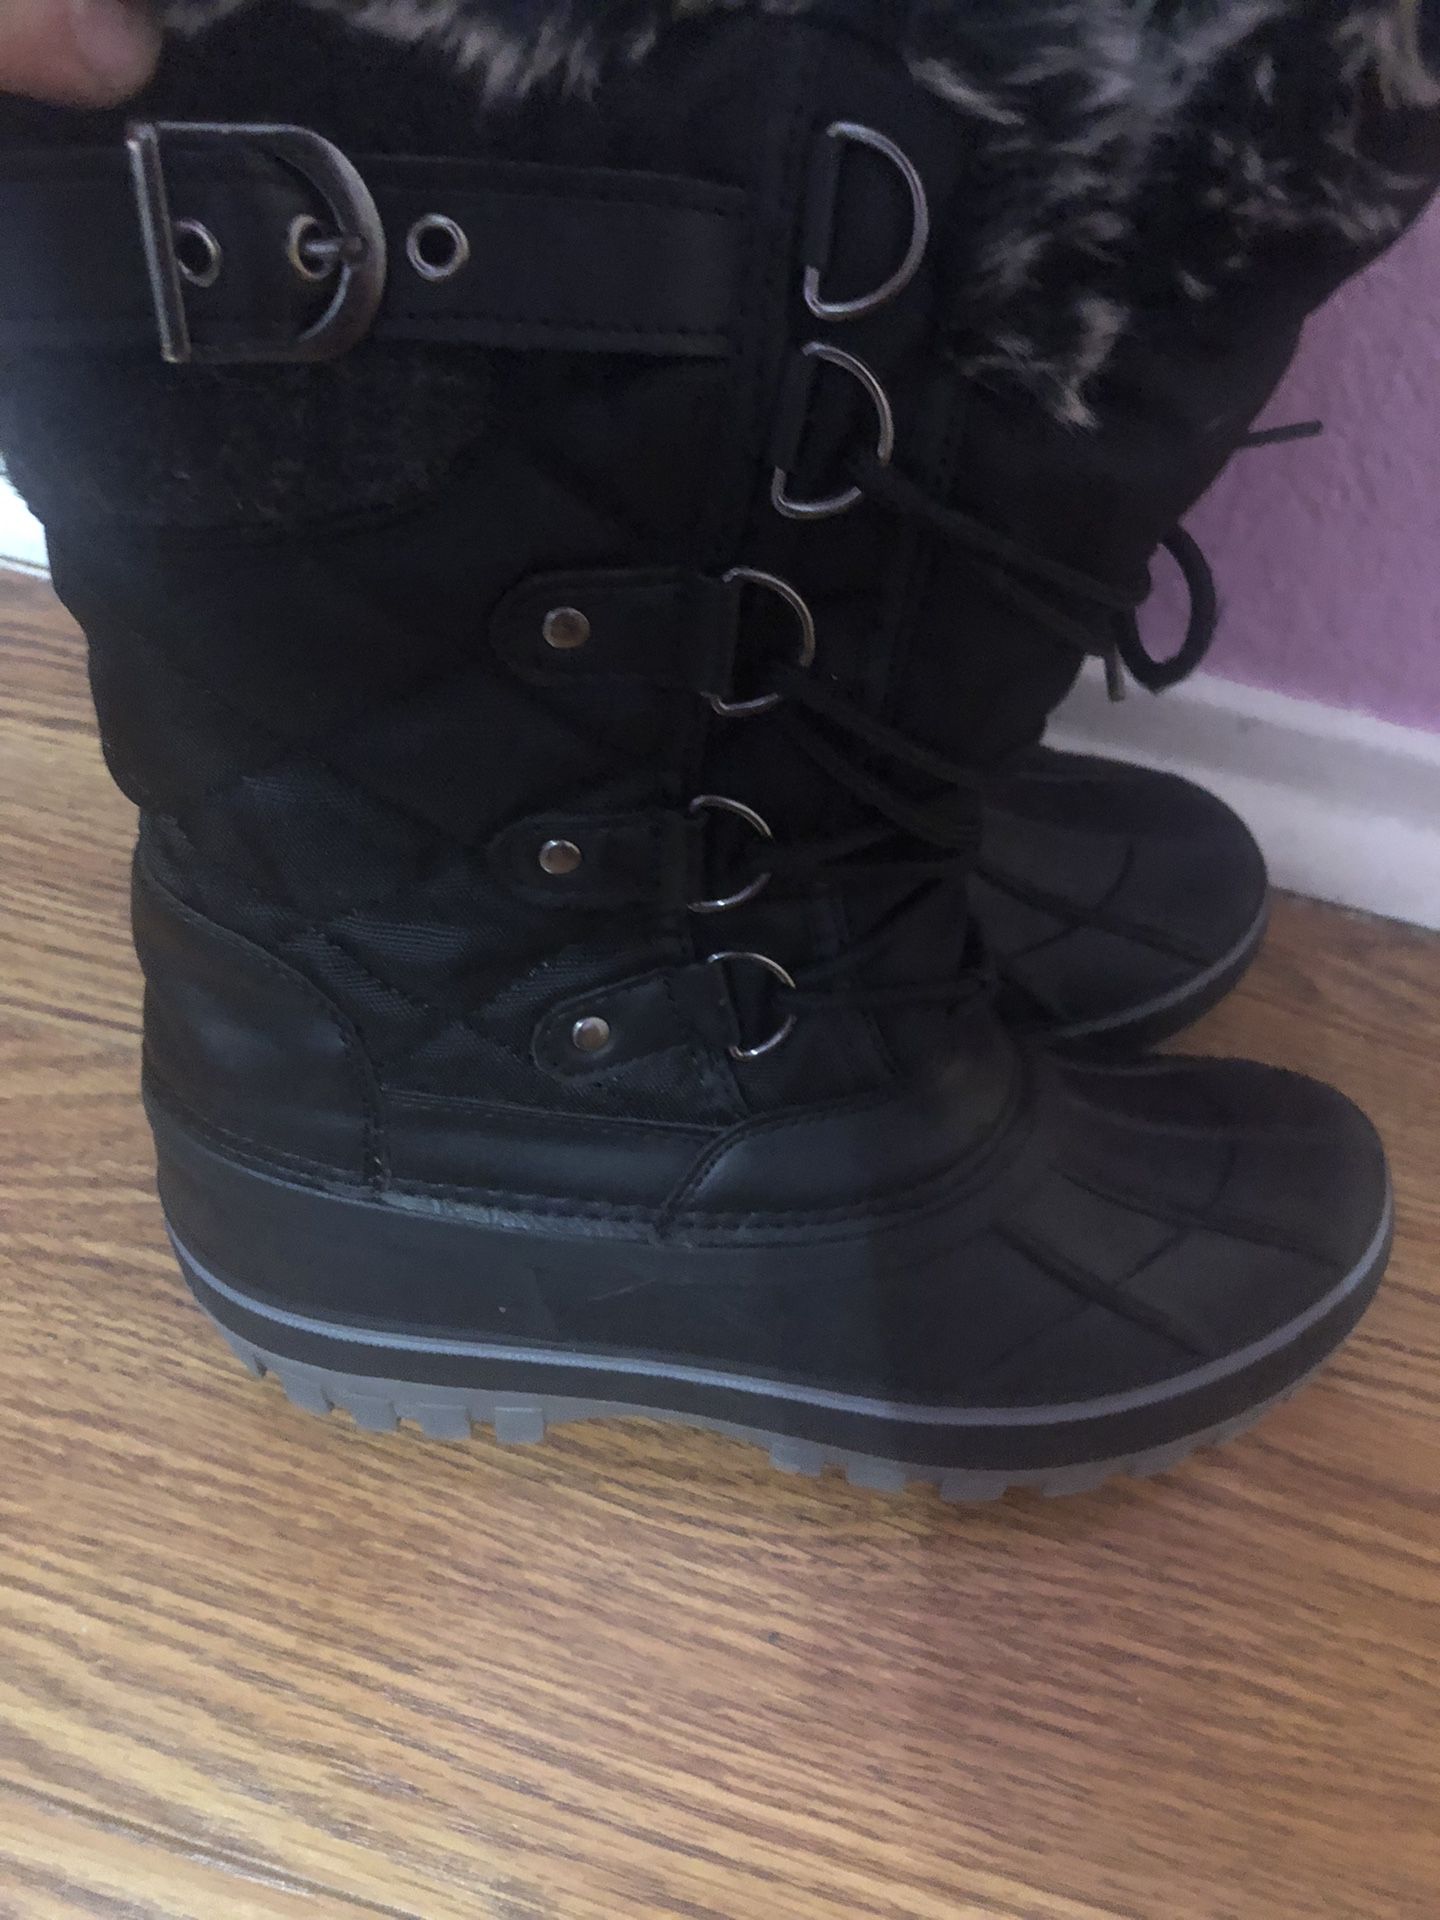 Snow Boots Size 4